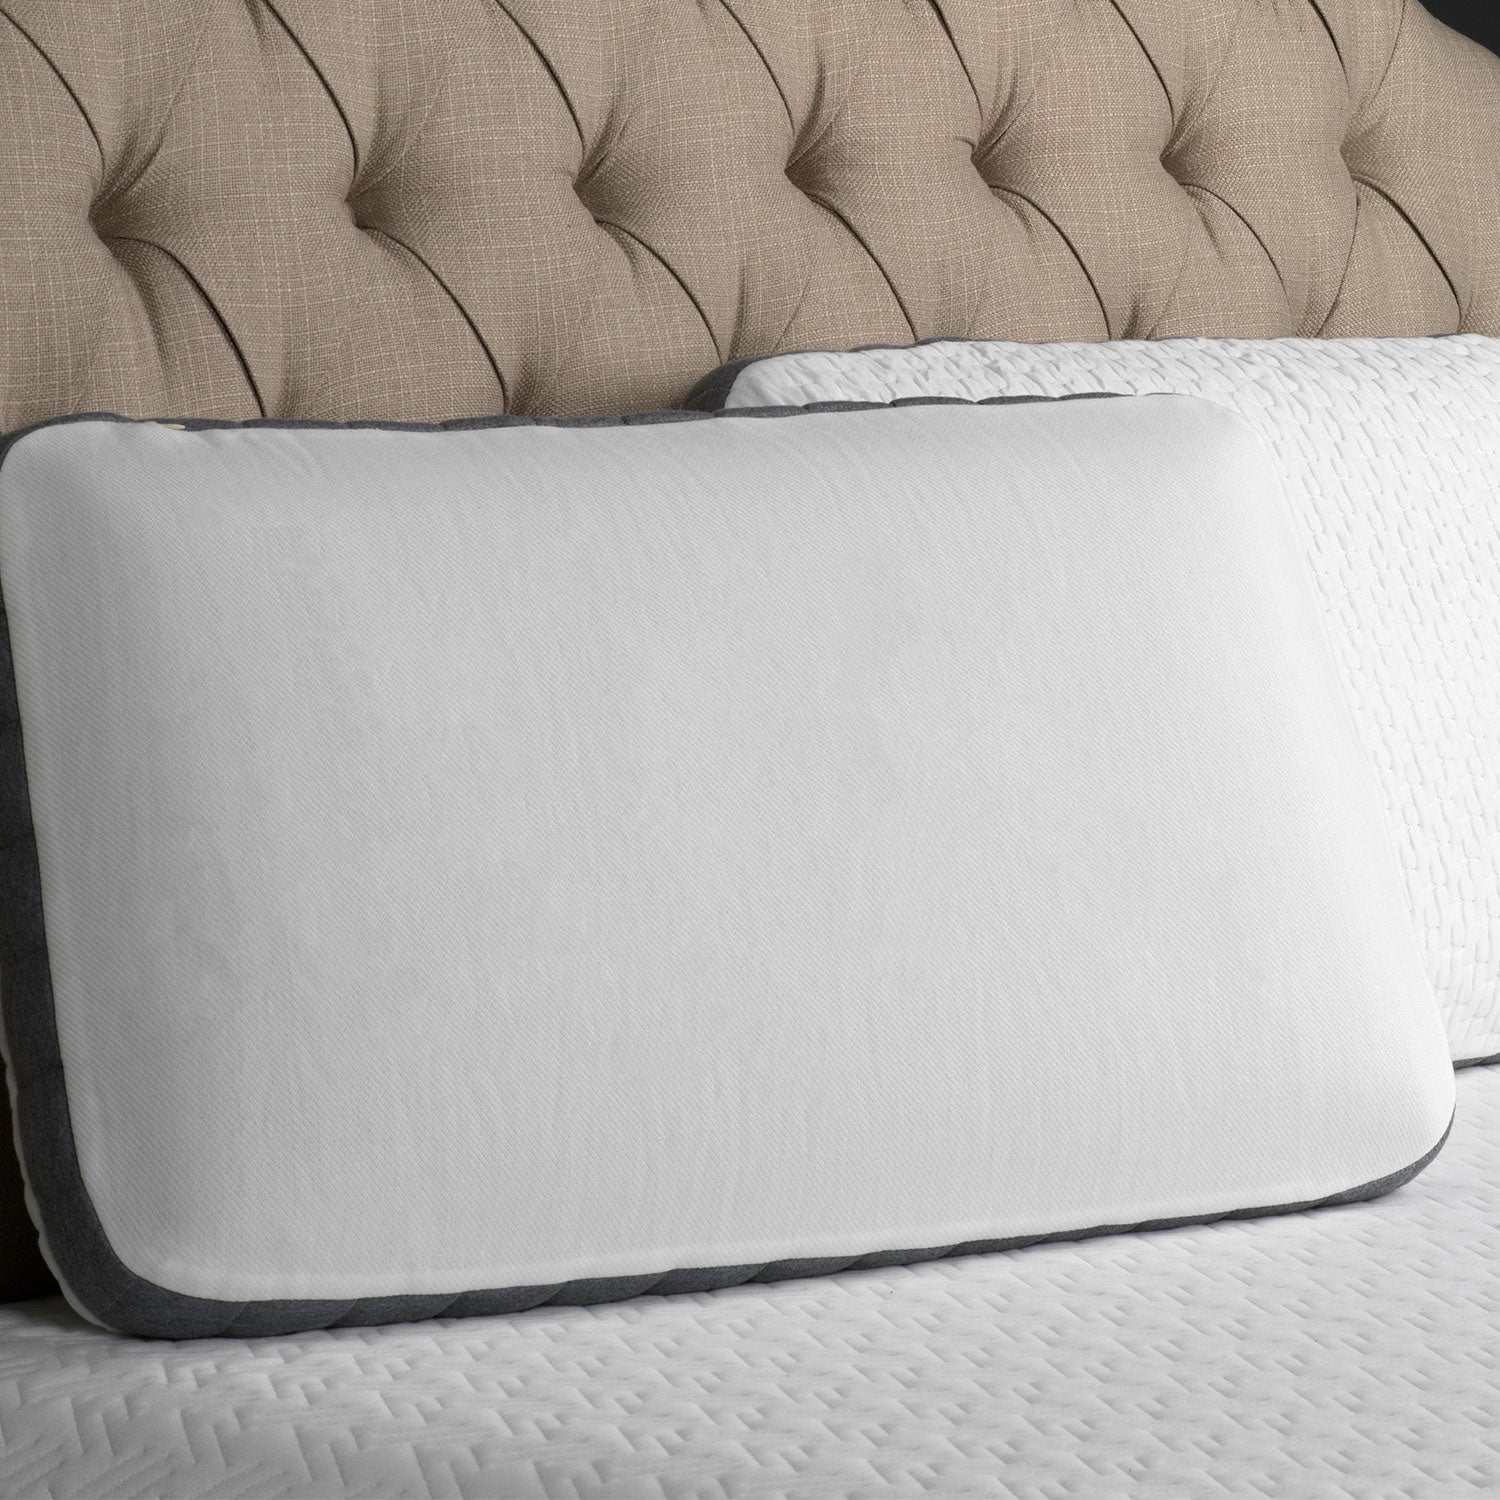 Bamboo Charcoal and Gel Memory Foam Pillow - Washable Cover